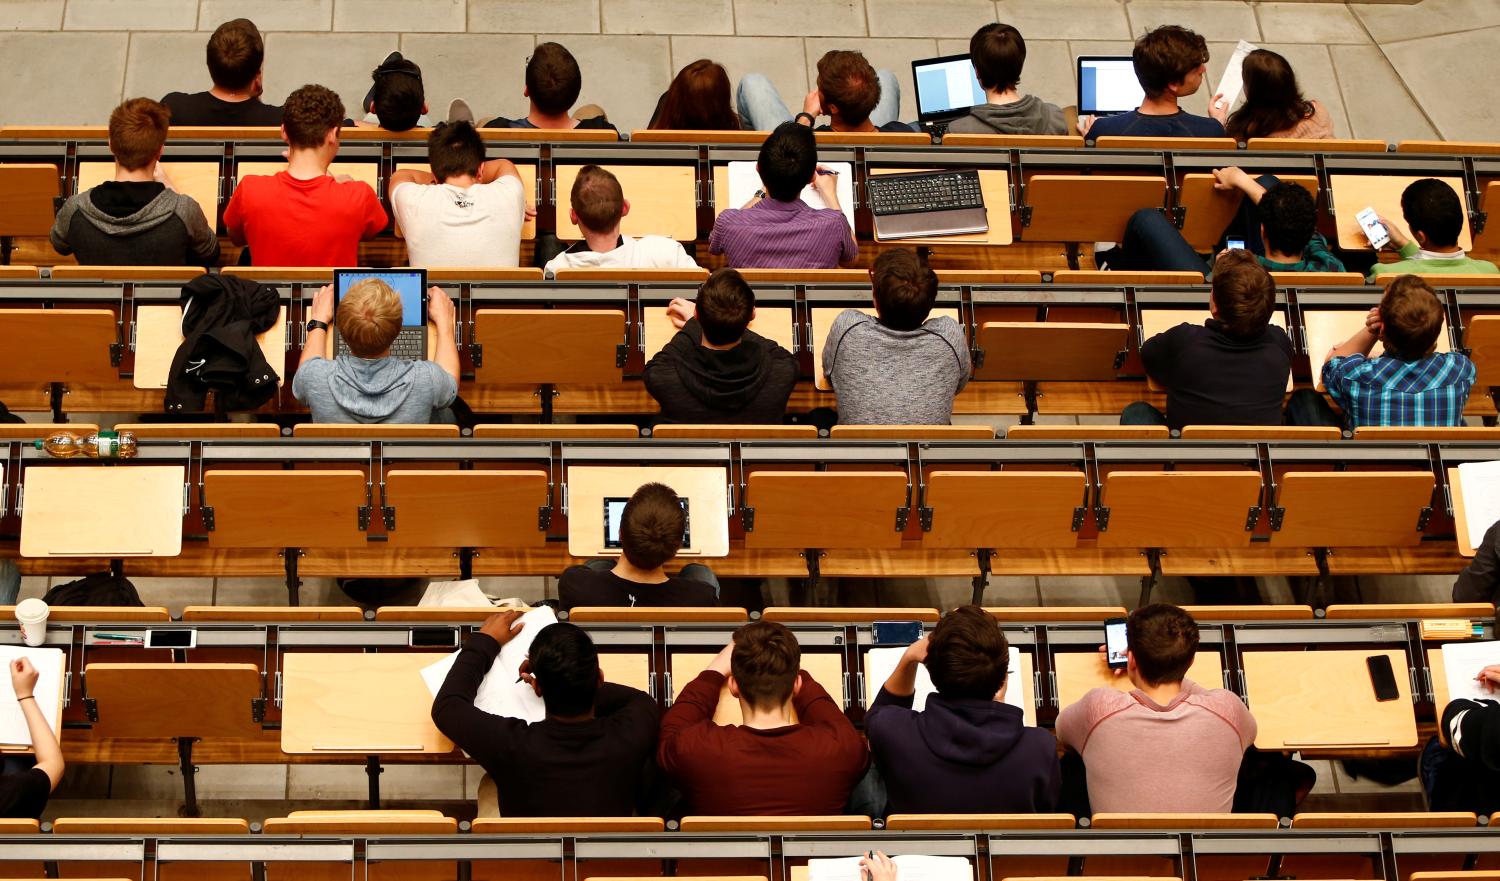 Students attend a lecture in the auditorium of the university.